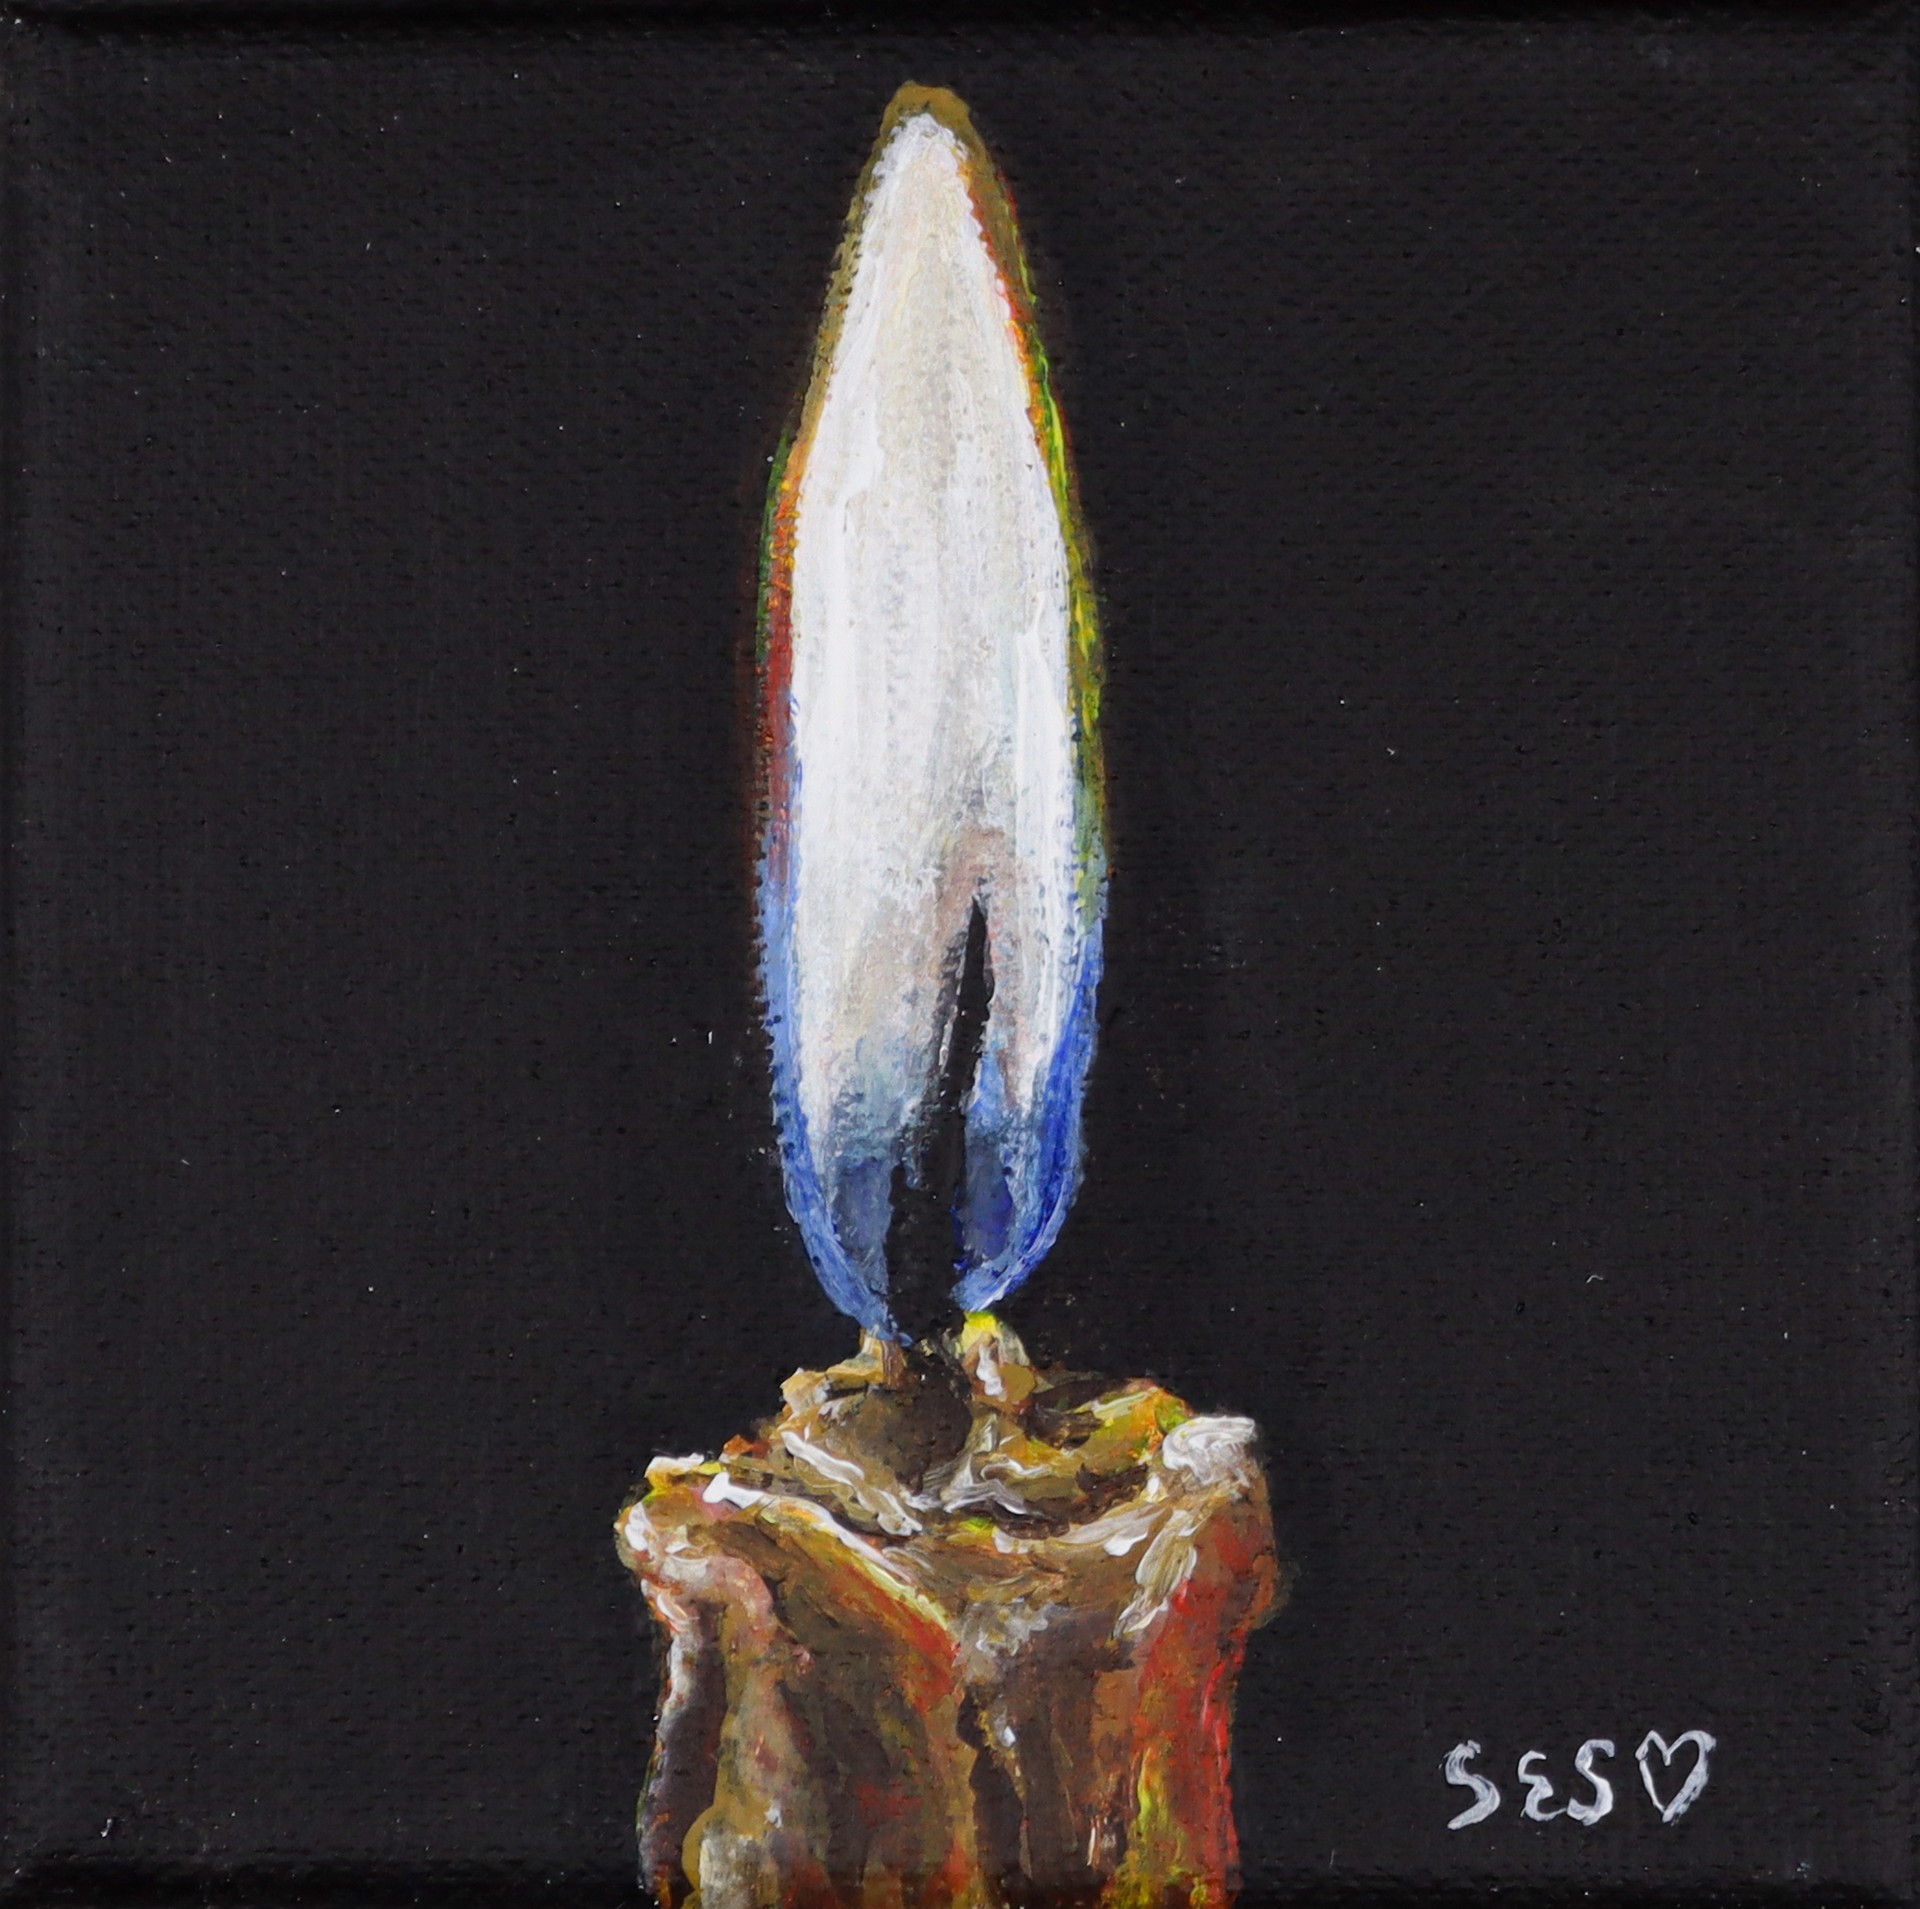 Candle Flame by Sarah Swan